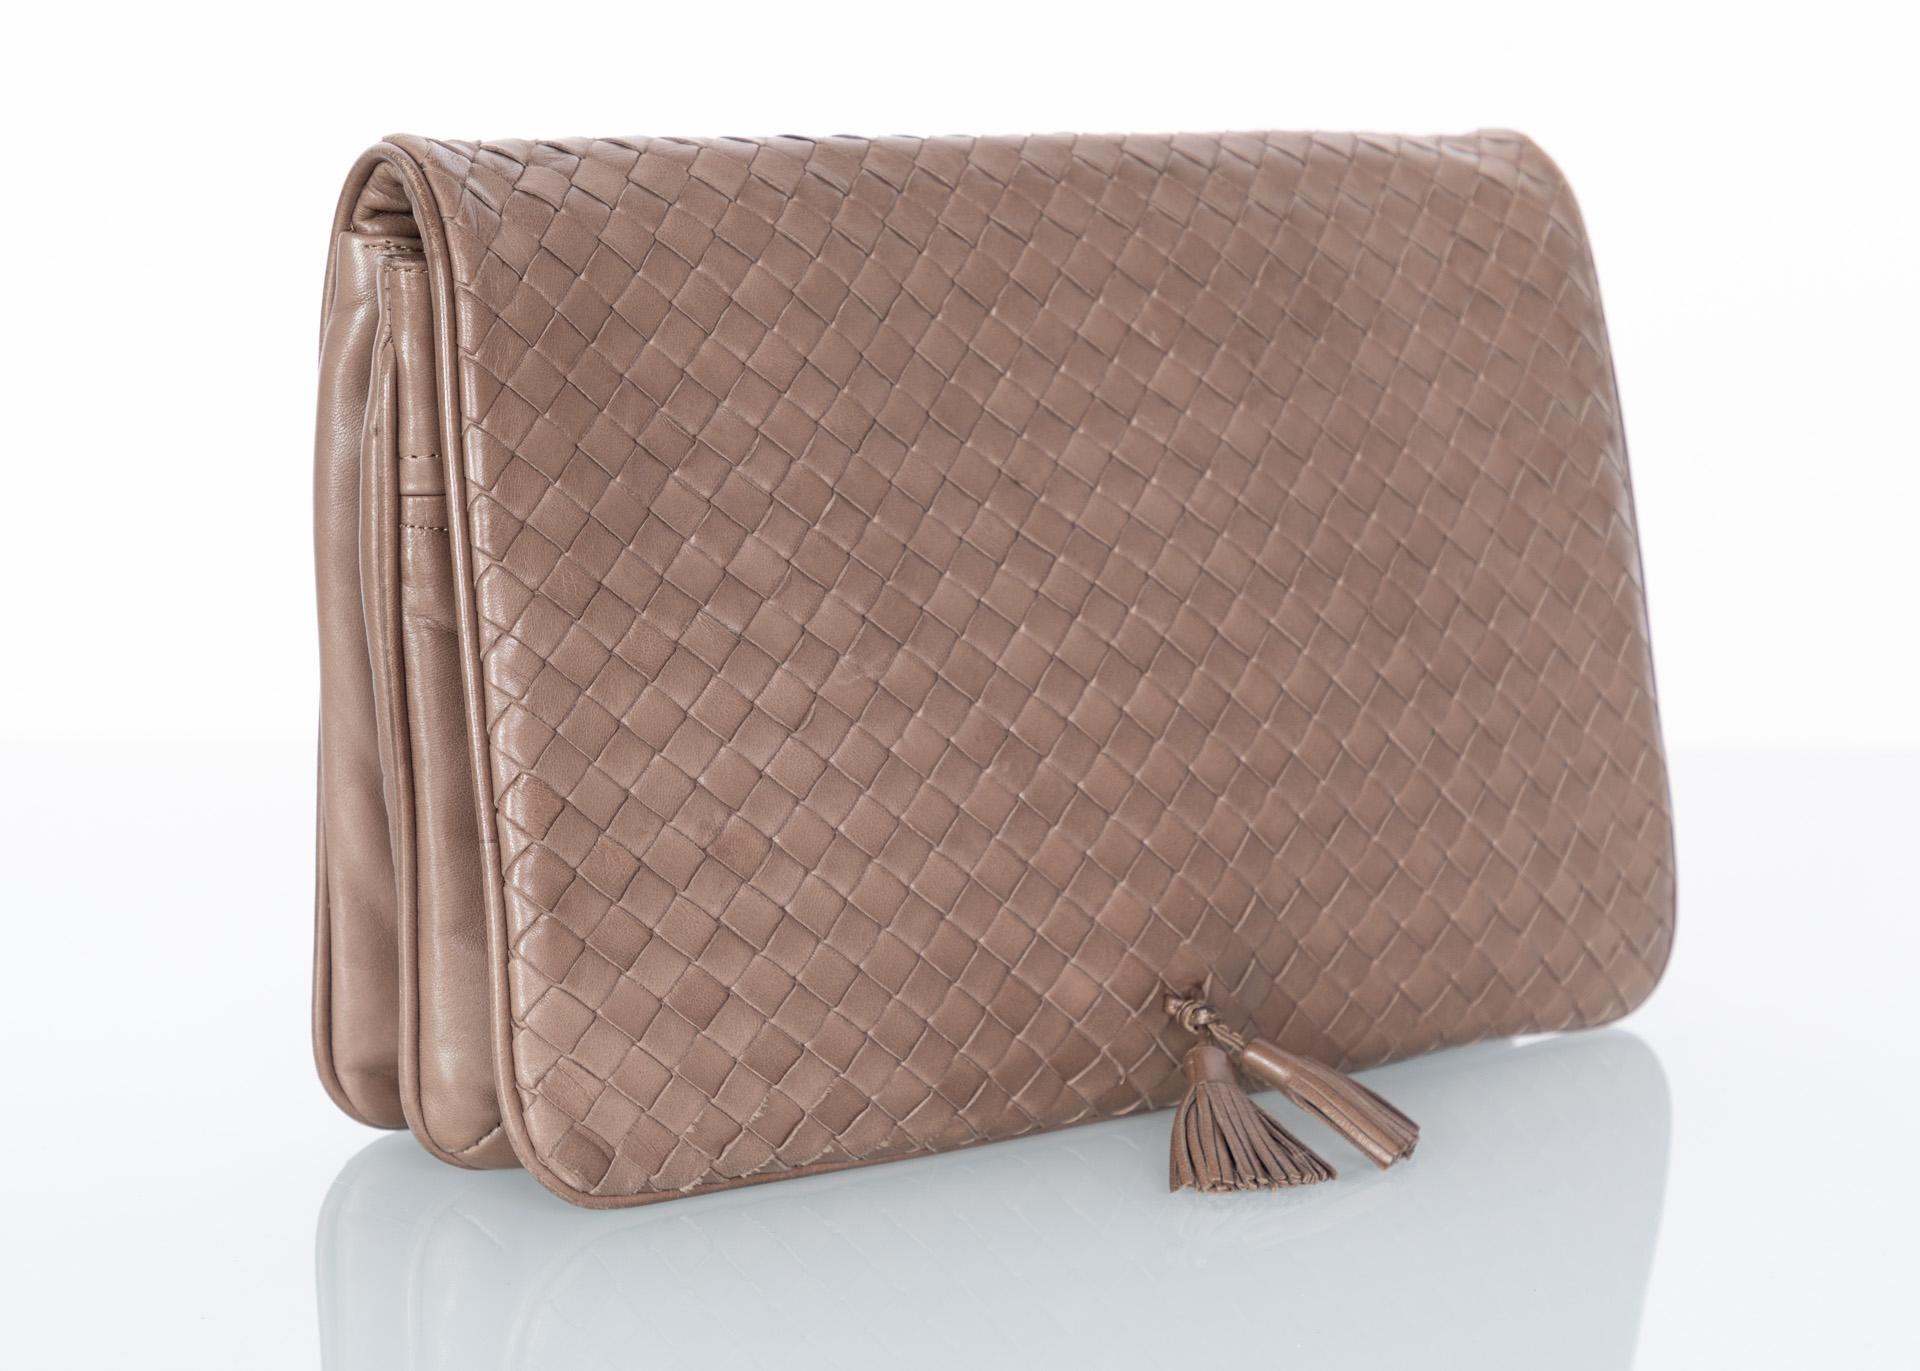 First introduced in the 1960s, the intrecciato (technique of weaving the leather) weave style became the iconic hallmark of Bottega Veneta leather goods—and eventually so much more. Starting out as a ready-to-wear brand, the intrecciato pattern was